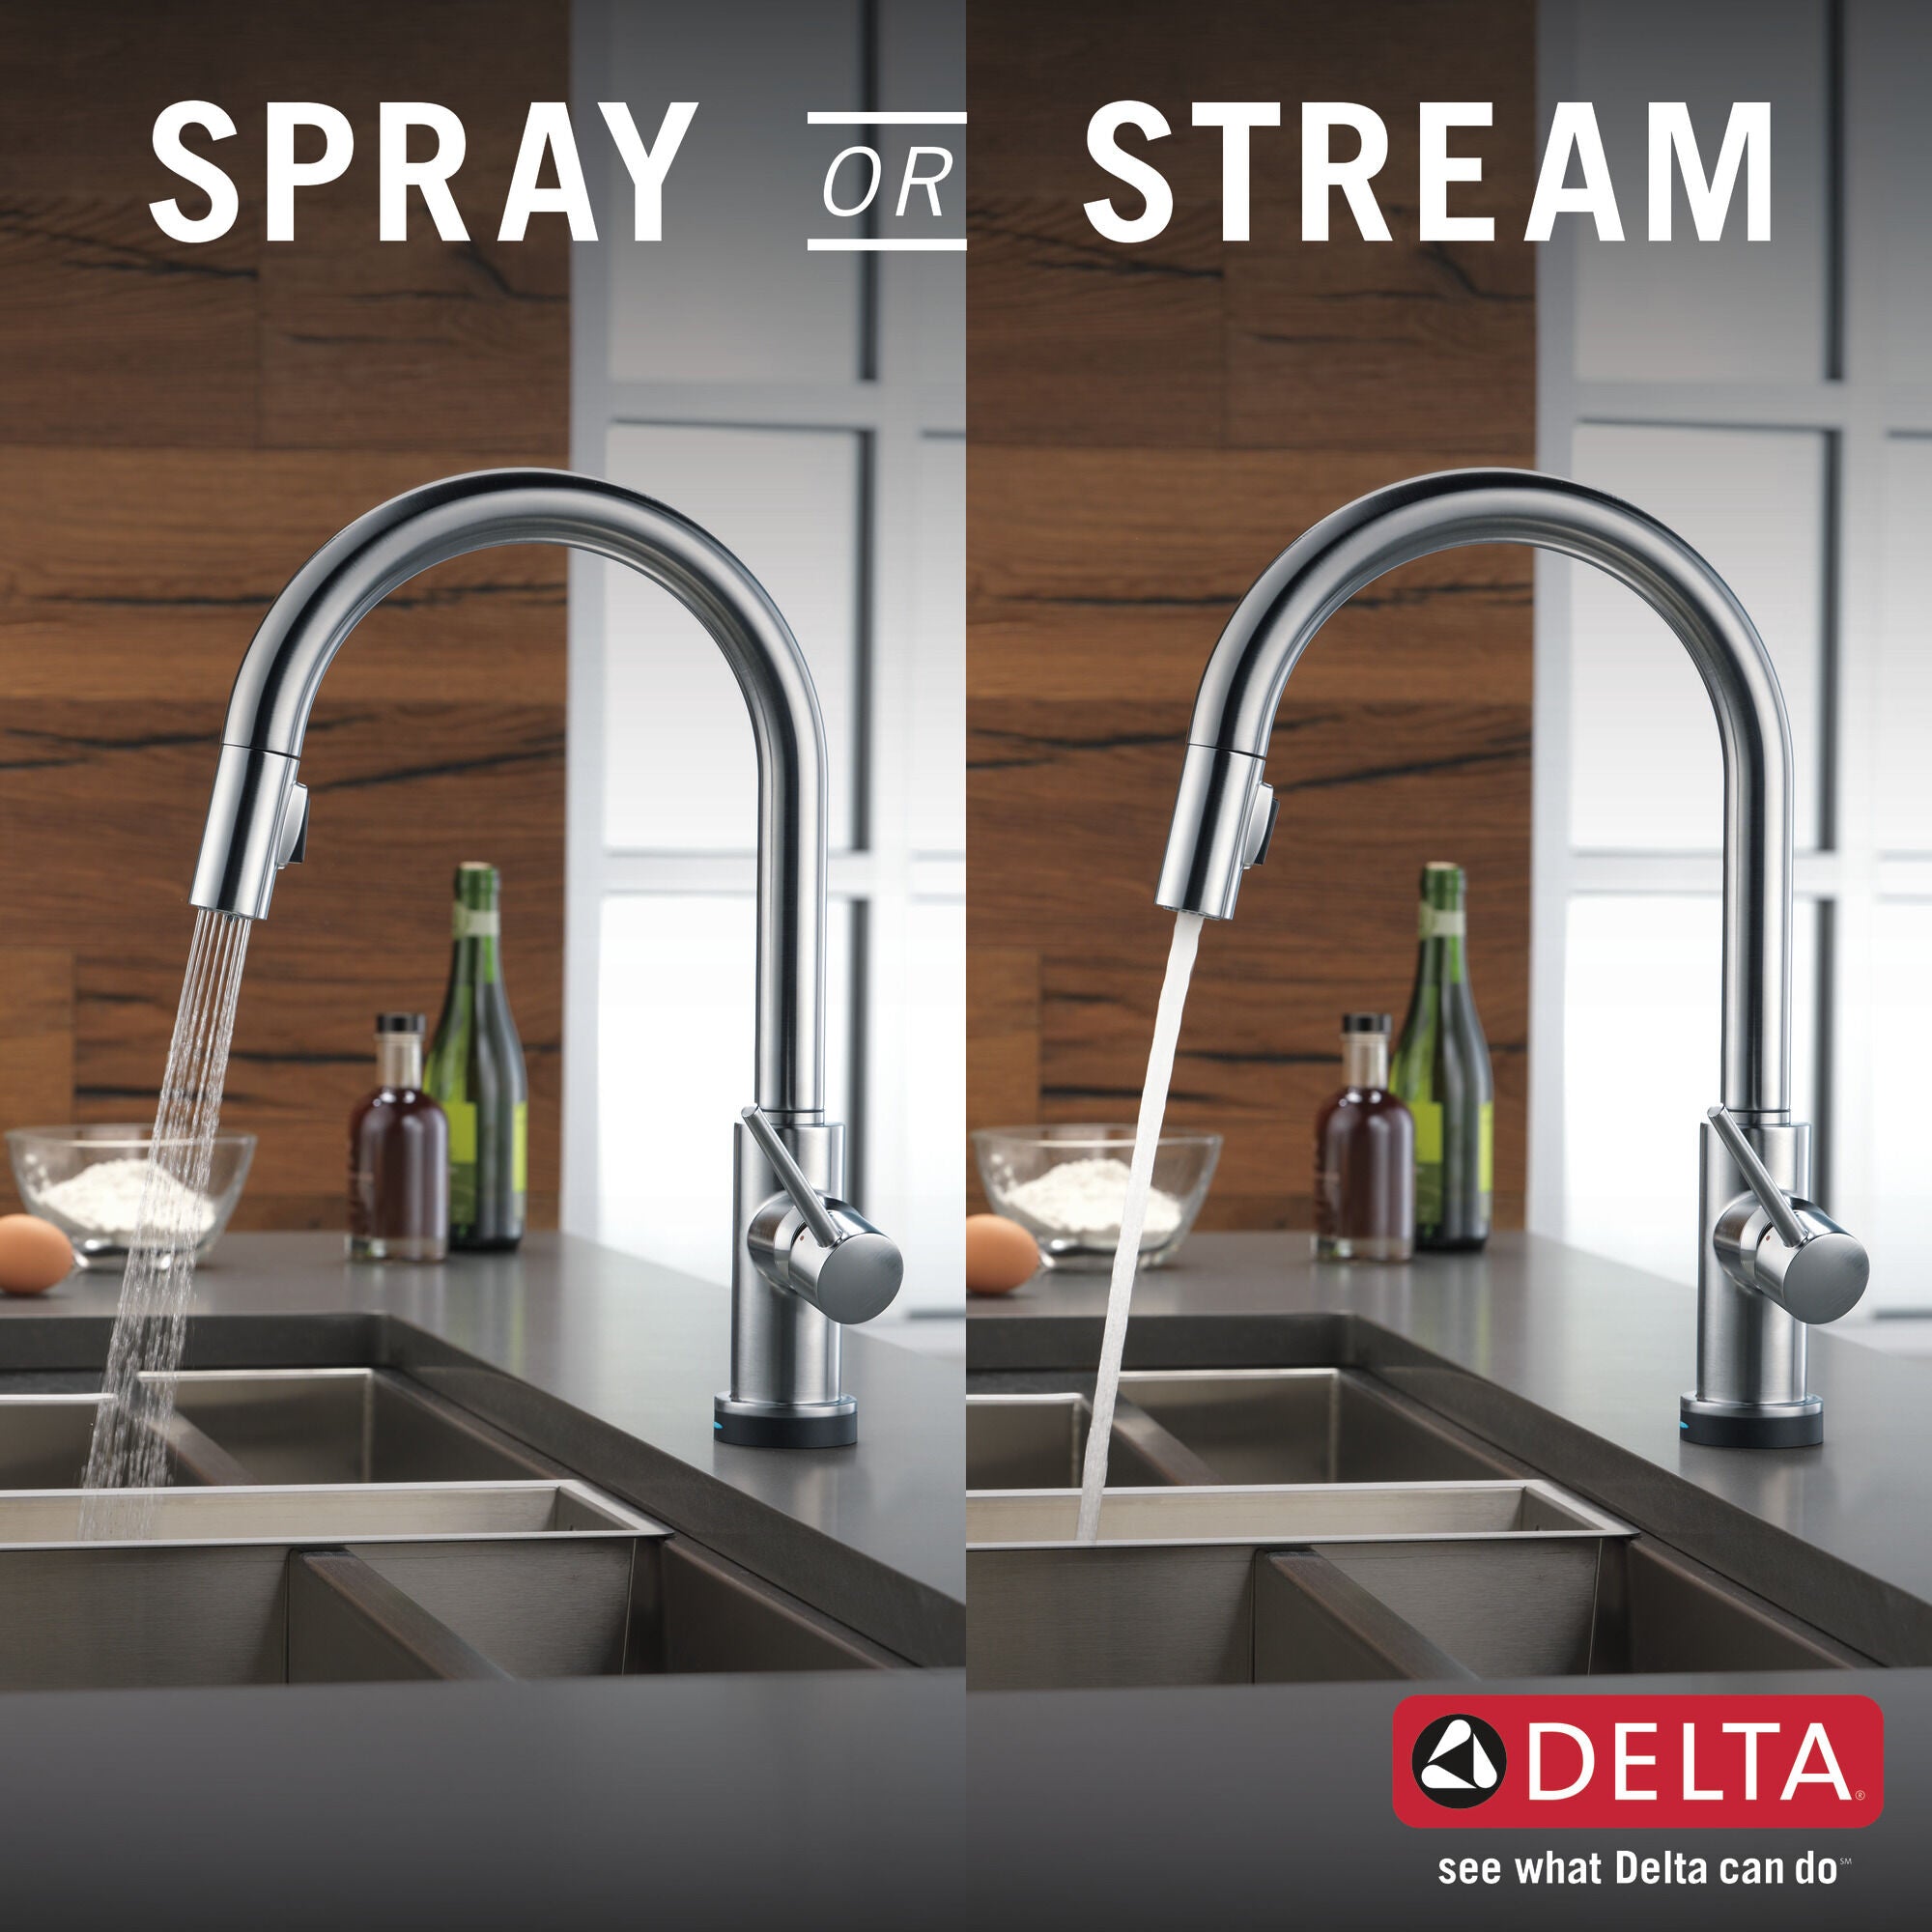 Delta Trinsic VoiceIQ™ Single-Handle Pull-Down Kitchen Faucet with TouchO Technology